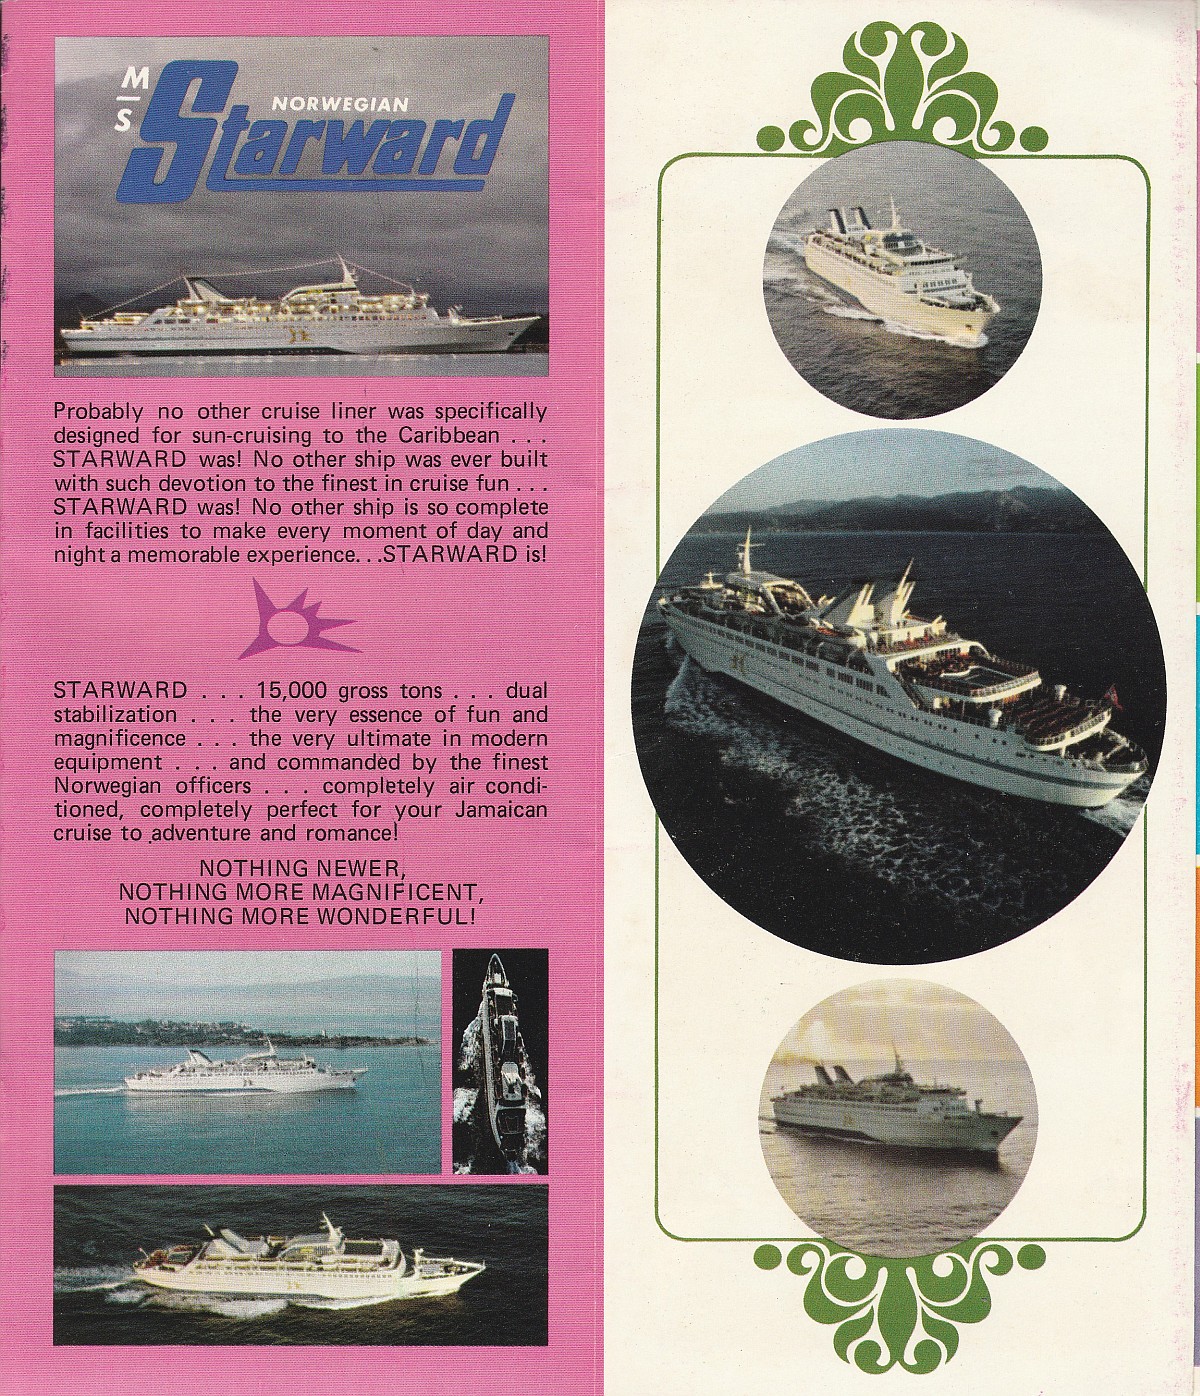 ms Starward Ship pictures: Probably no other cruise liner was specifically designed for sun-cruising to the Caribbean - Starward was!